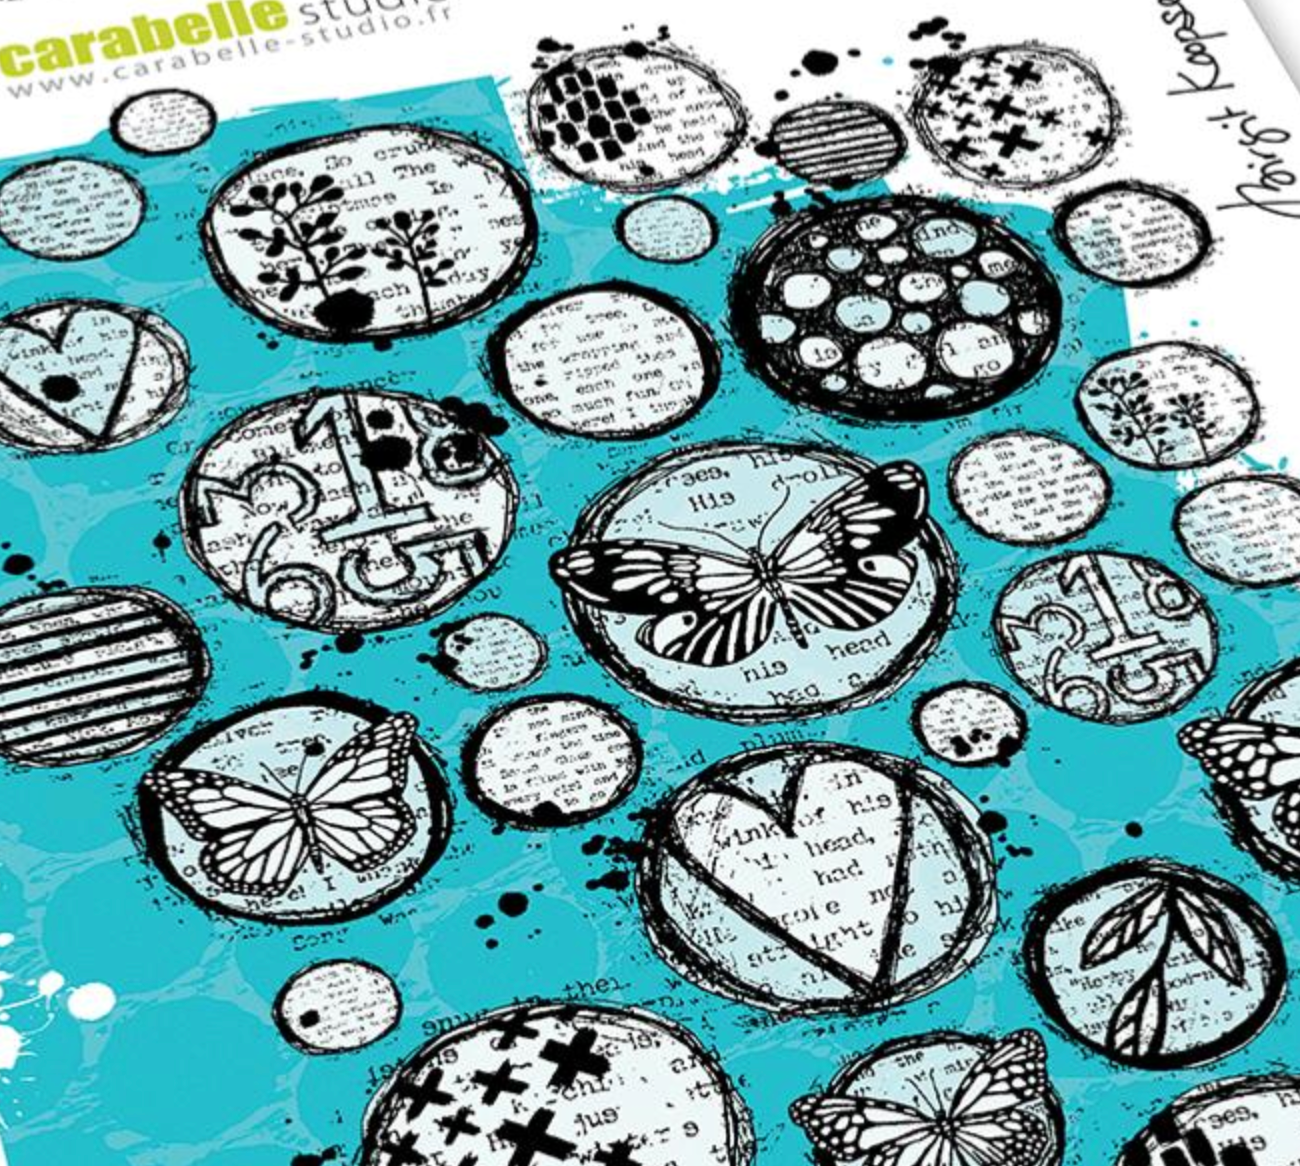 Carabelle Studio - Rubber Cling Stamp - Circles Galore - A5